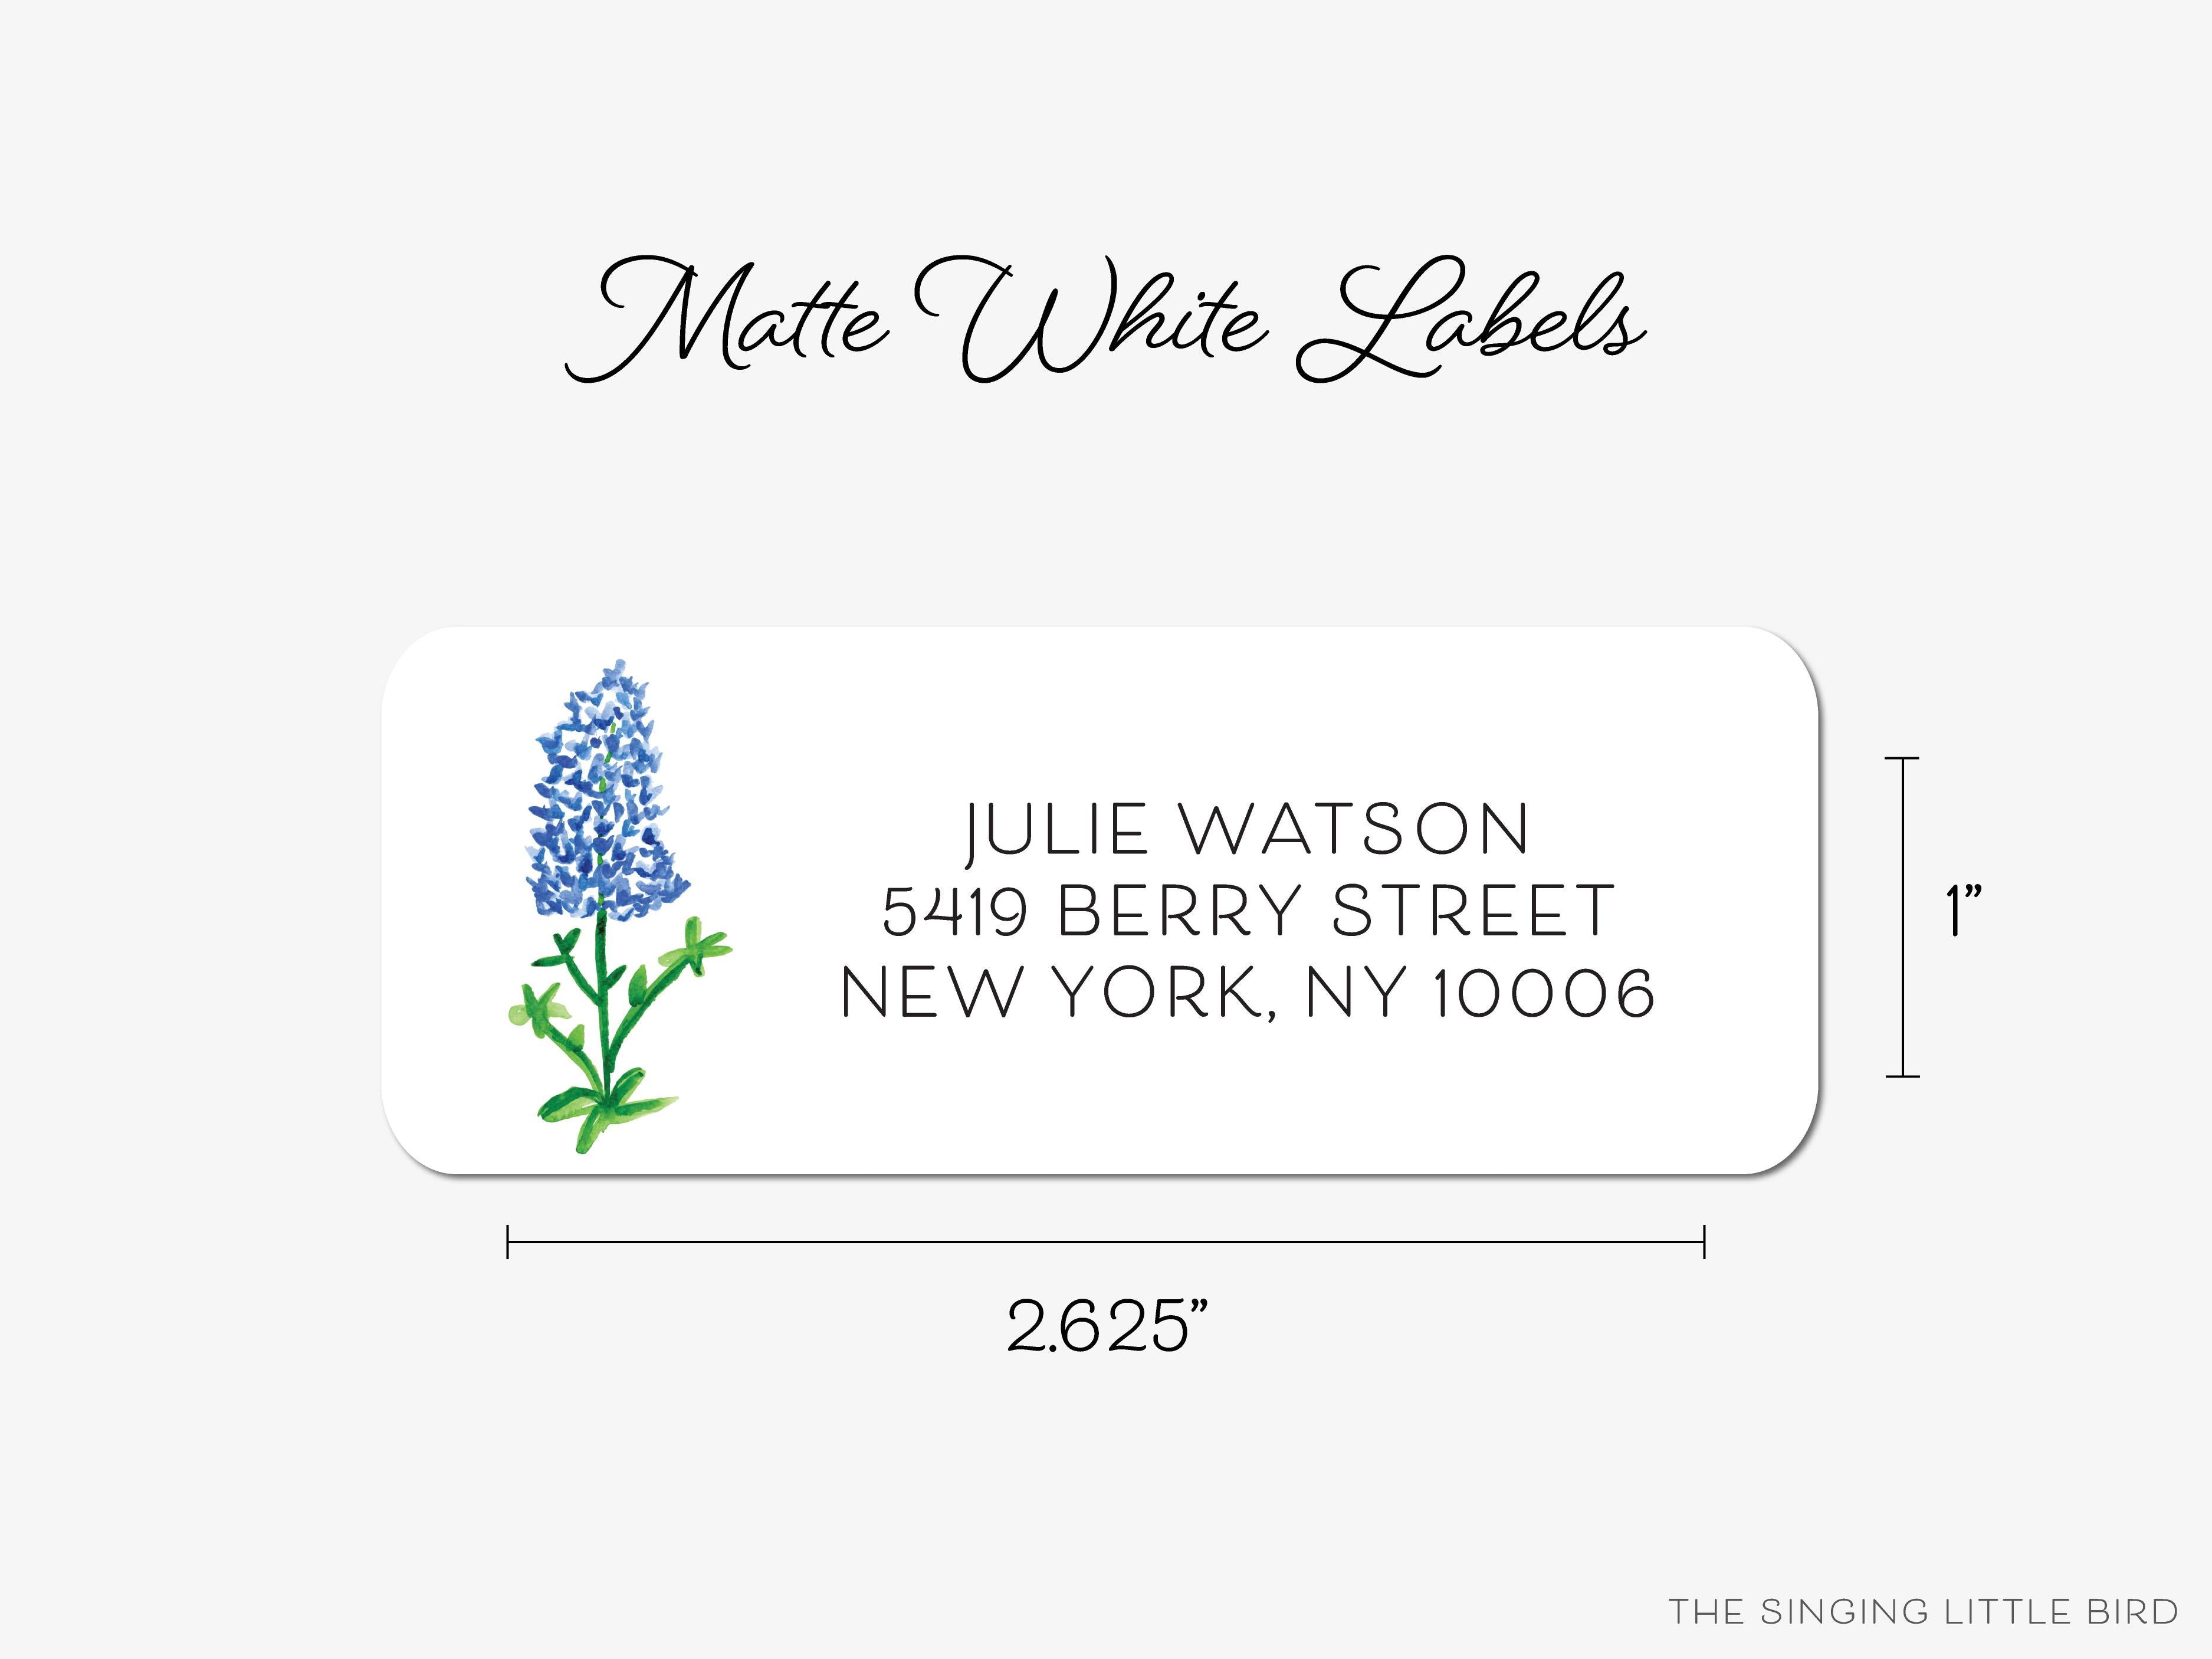 Texas Bluebonnet Return Address Labels-These personalized return address labels are 2.625" x 1" and feature our hand-painted watercolor Texas Bluebonnet, printed in the USA on beautiful matte finish labels. These make great gifts for yourself or the flower lover.-The Singing Little Bird